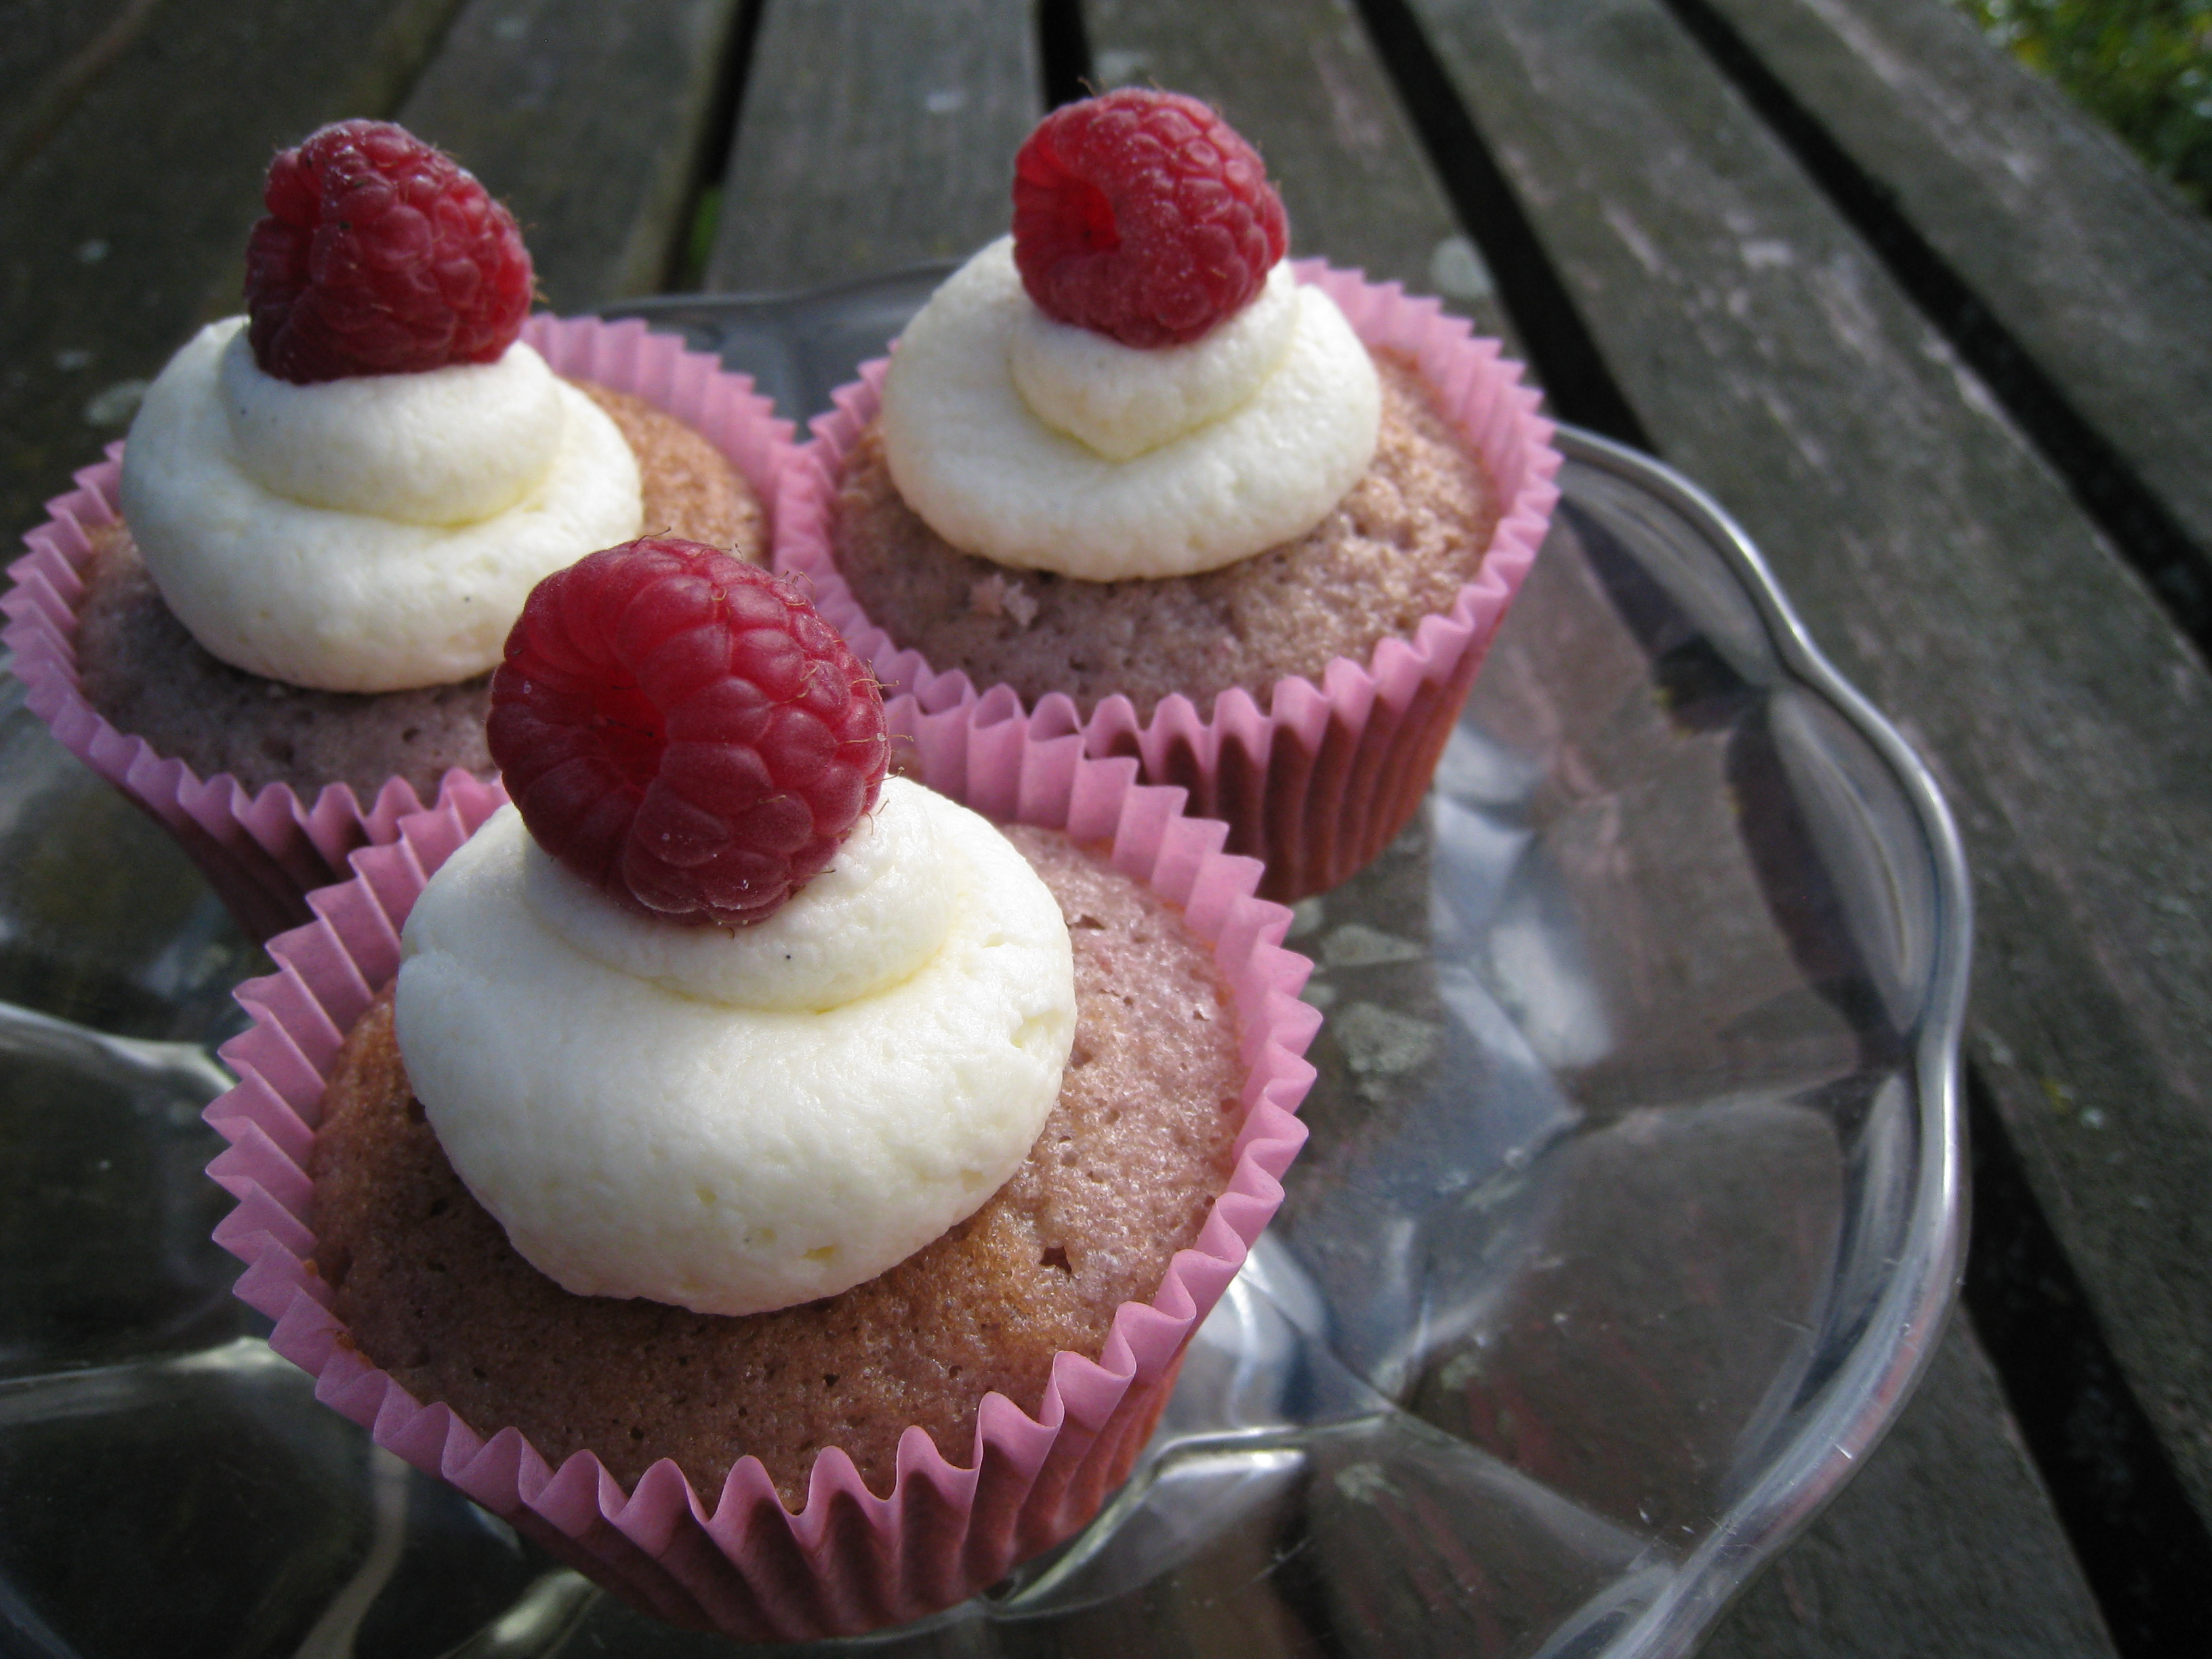 Cupcake with Raspberry Compote